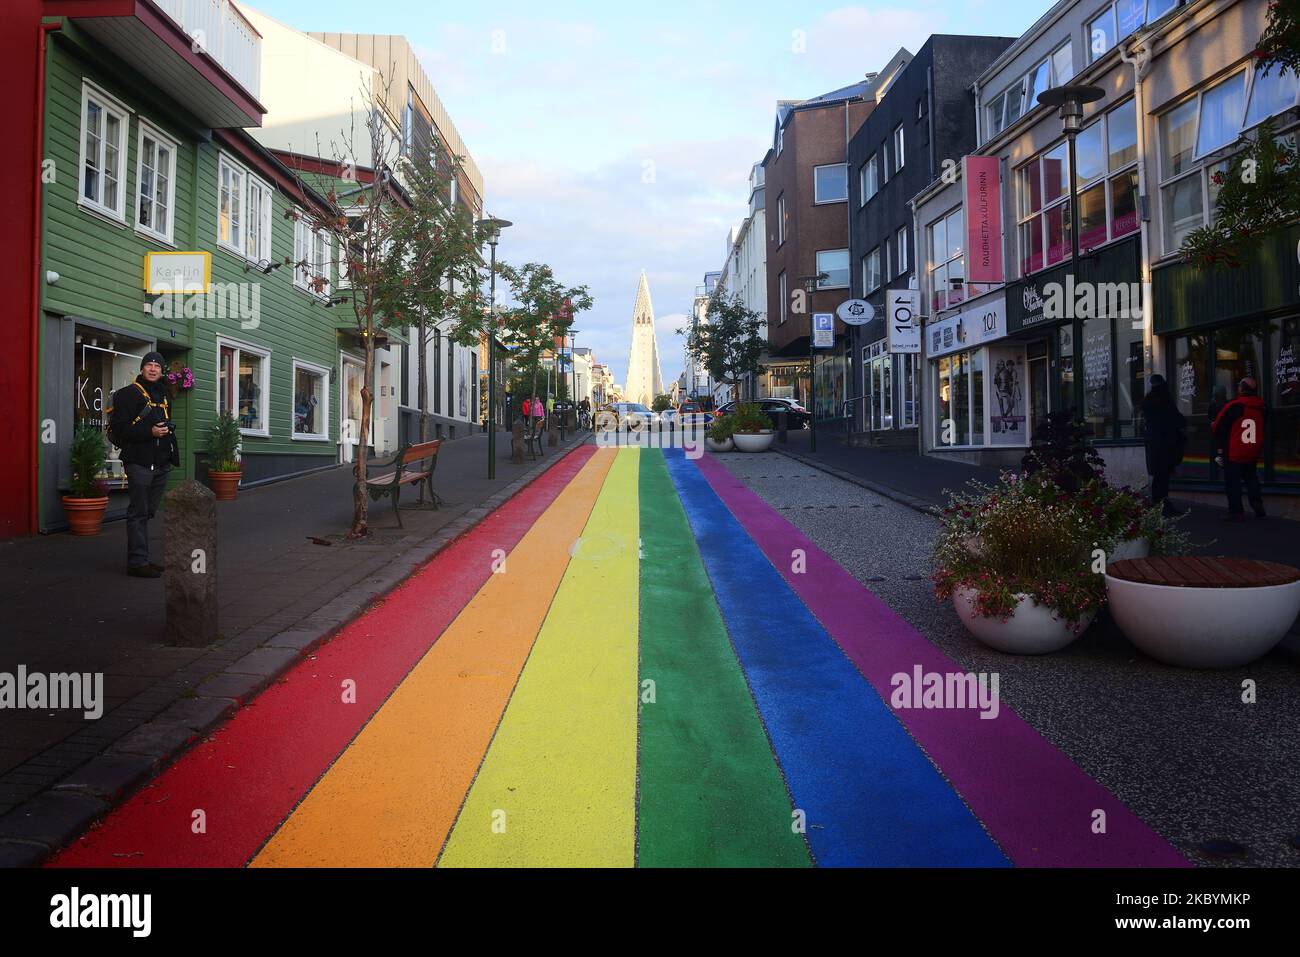 A colourful gay pride street symbol in Reykjavik, Iceland Stock Photo